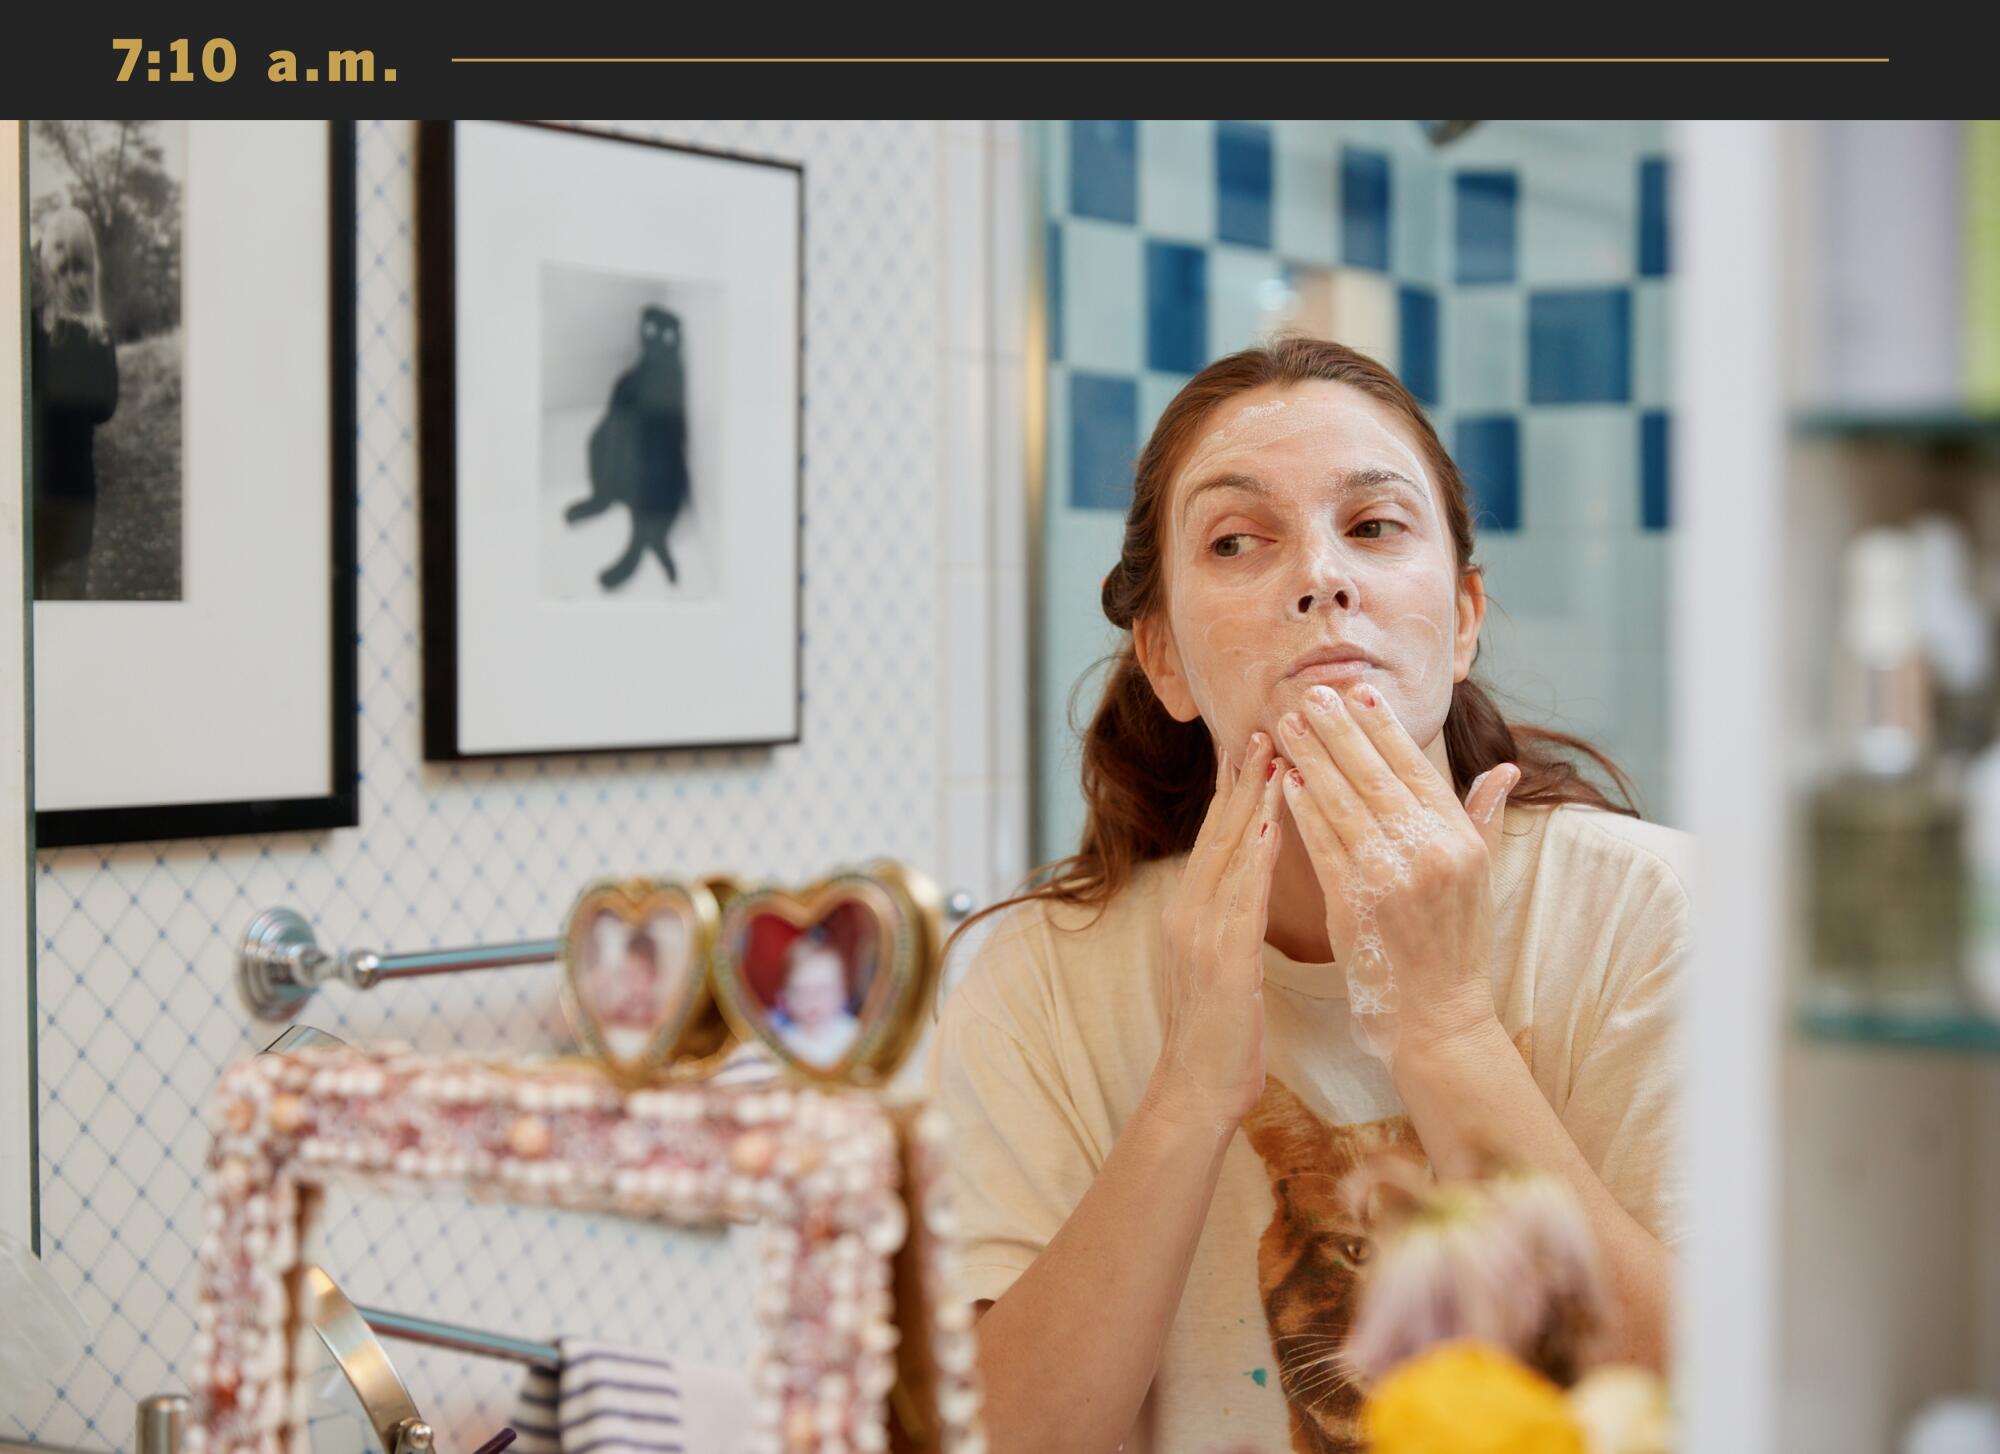 Drew Barrymore looks in her bathroom mirror while washing her face.